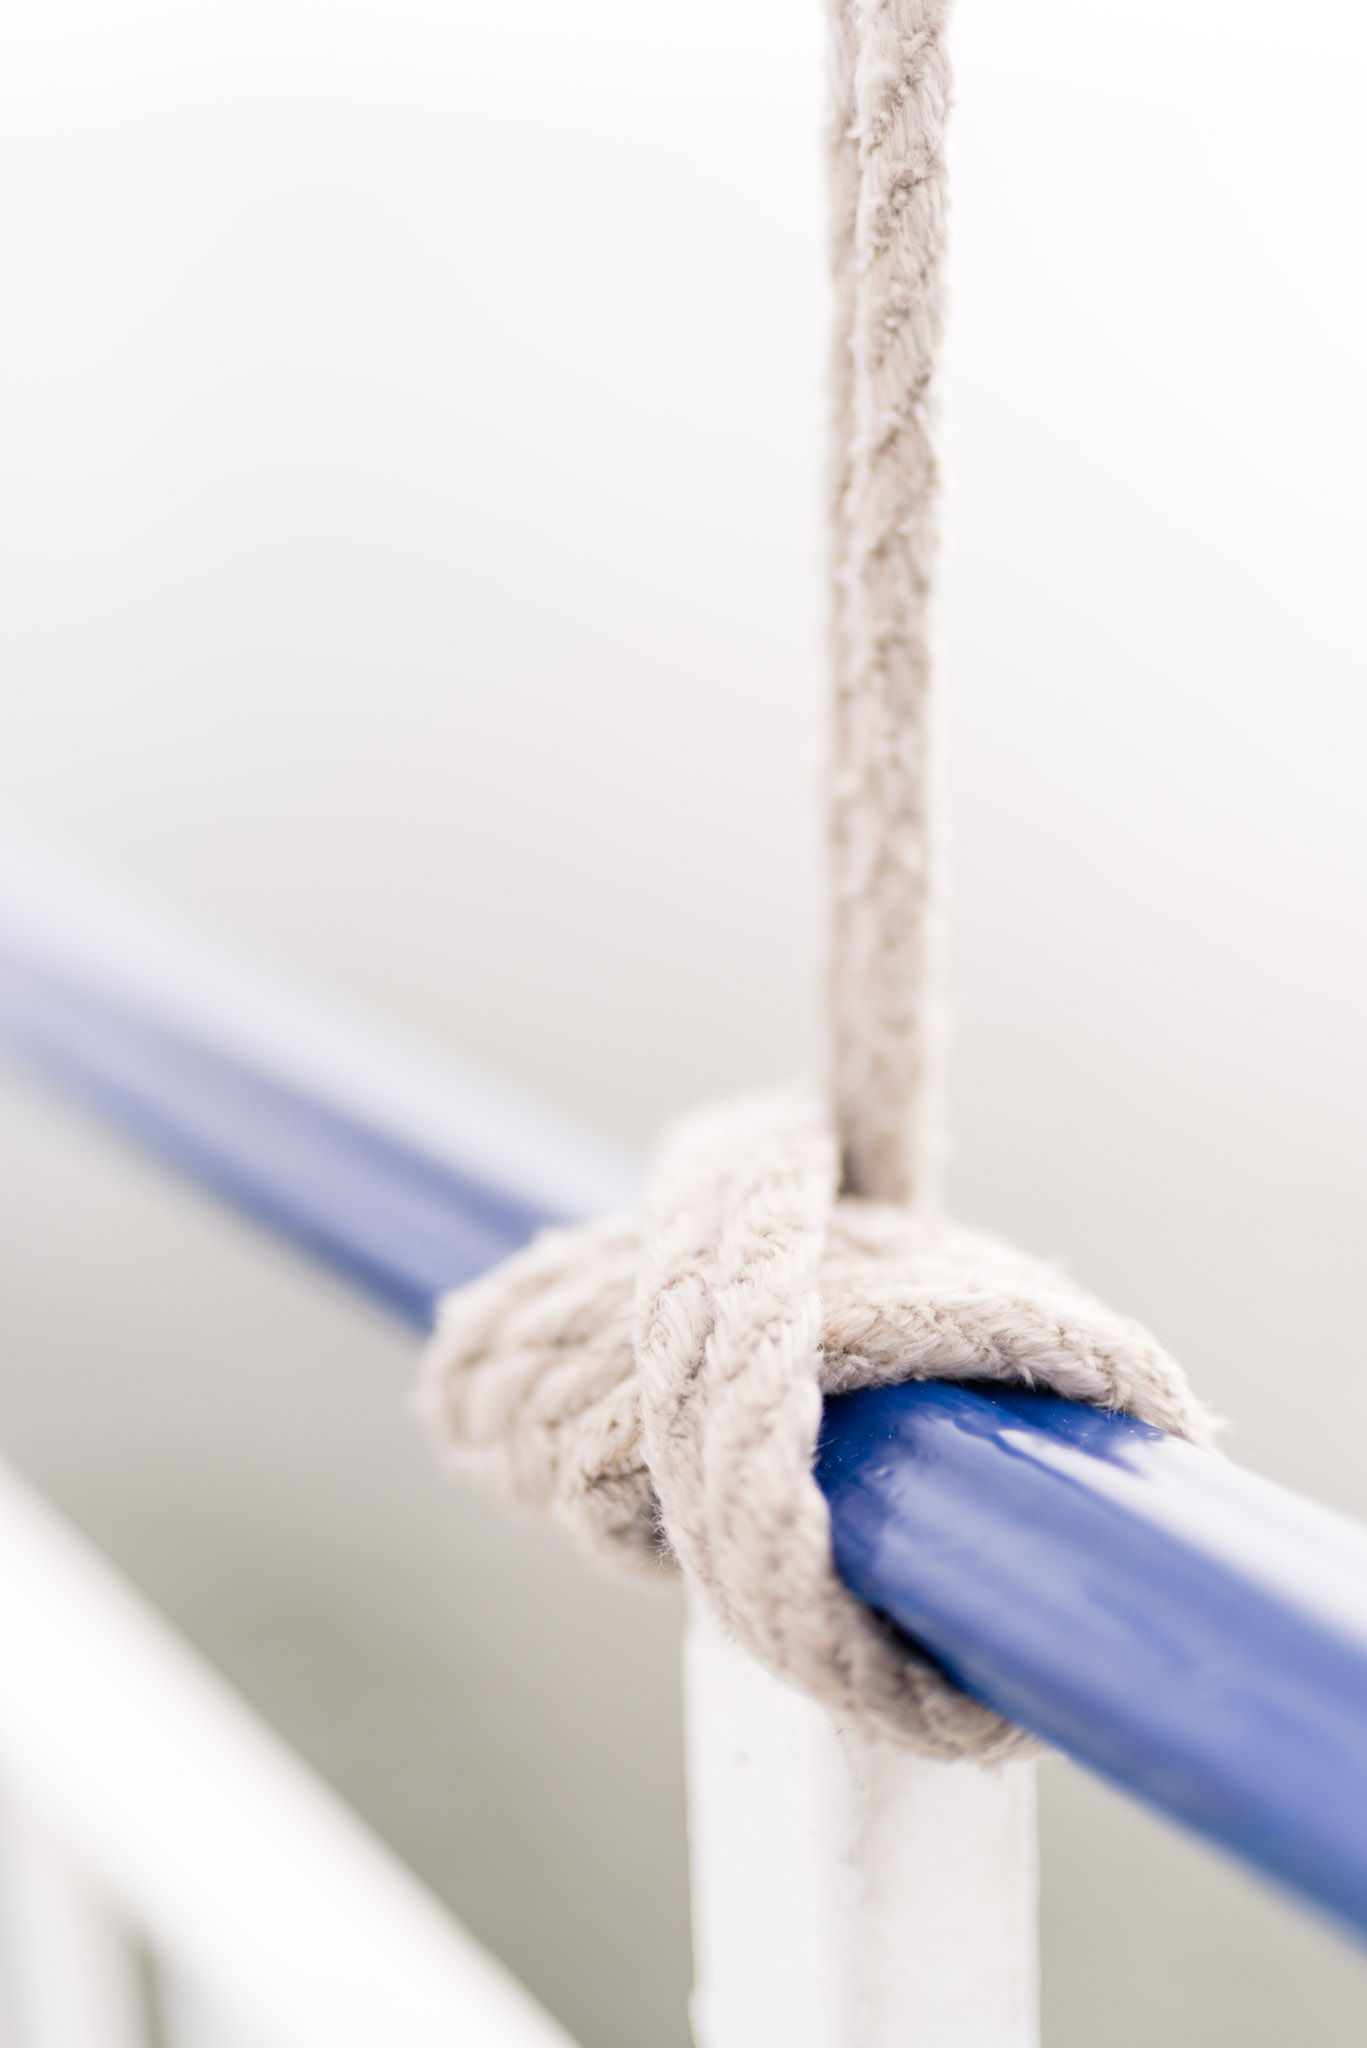 Nautical Rope tied to boat